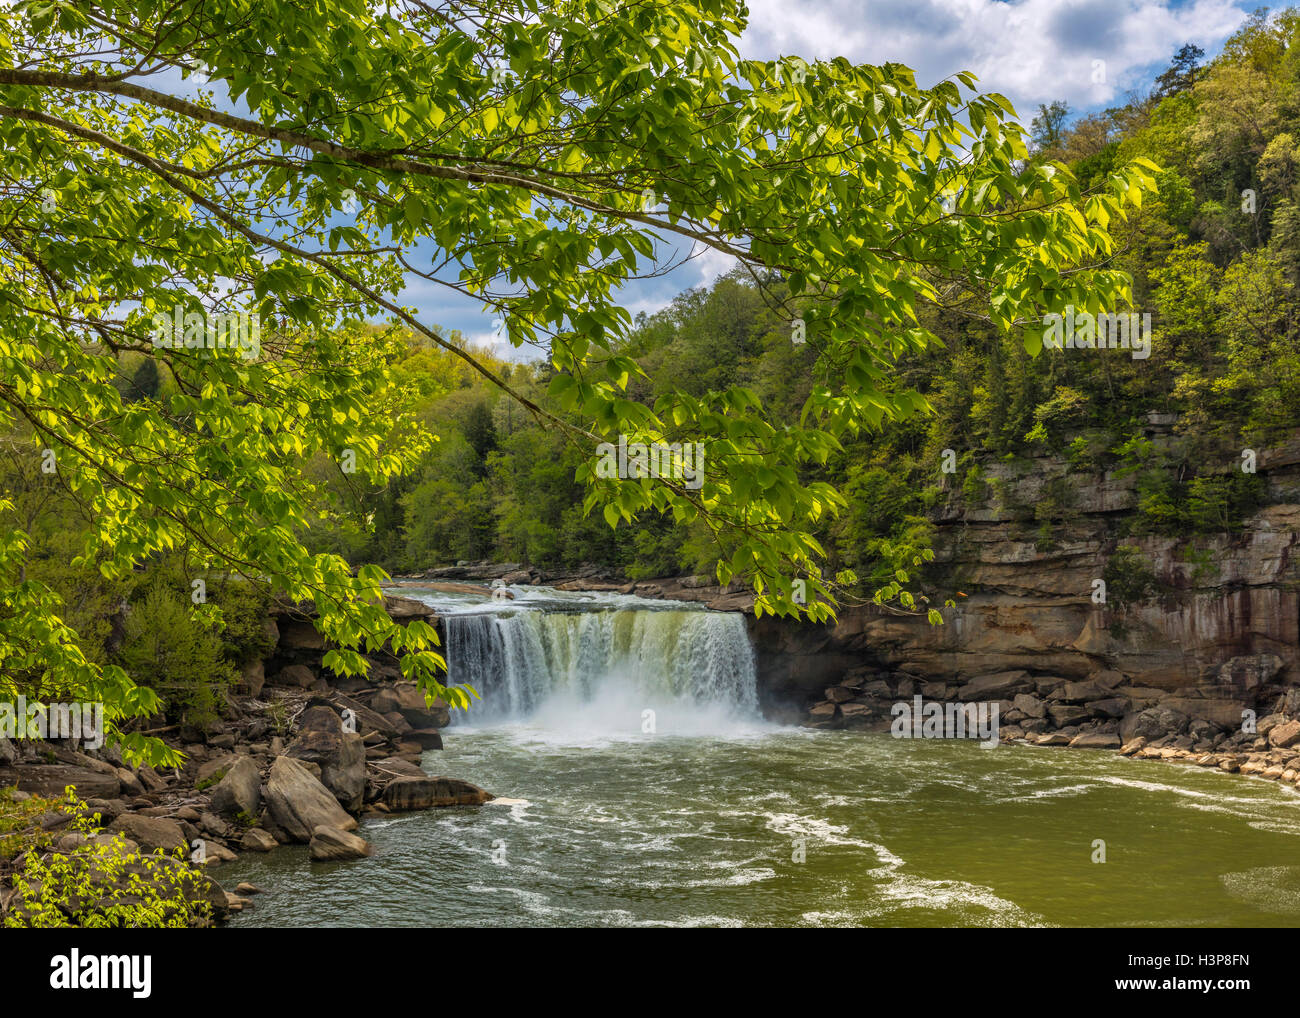 Cumberland Falls State Park, Kentucky: Tree branches frame the view of Cumberland Falls with the Cumberland River in spring Stock Photo